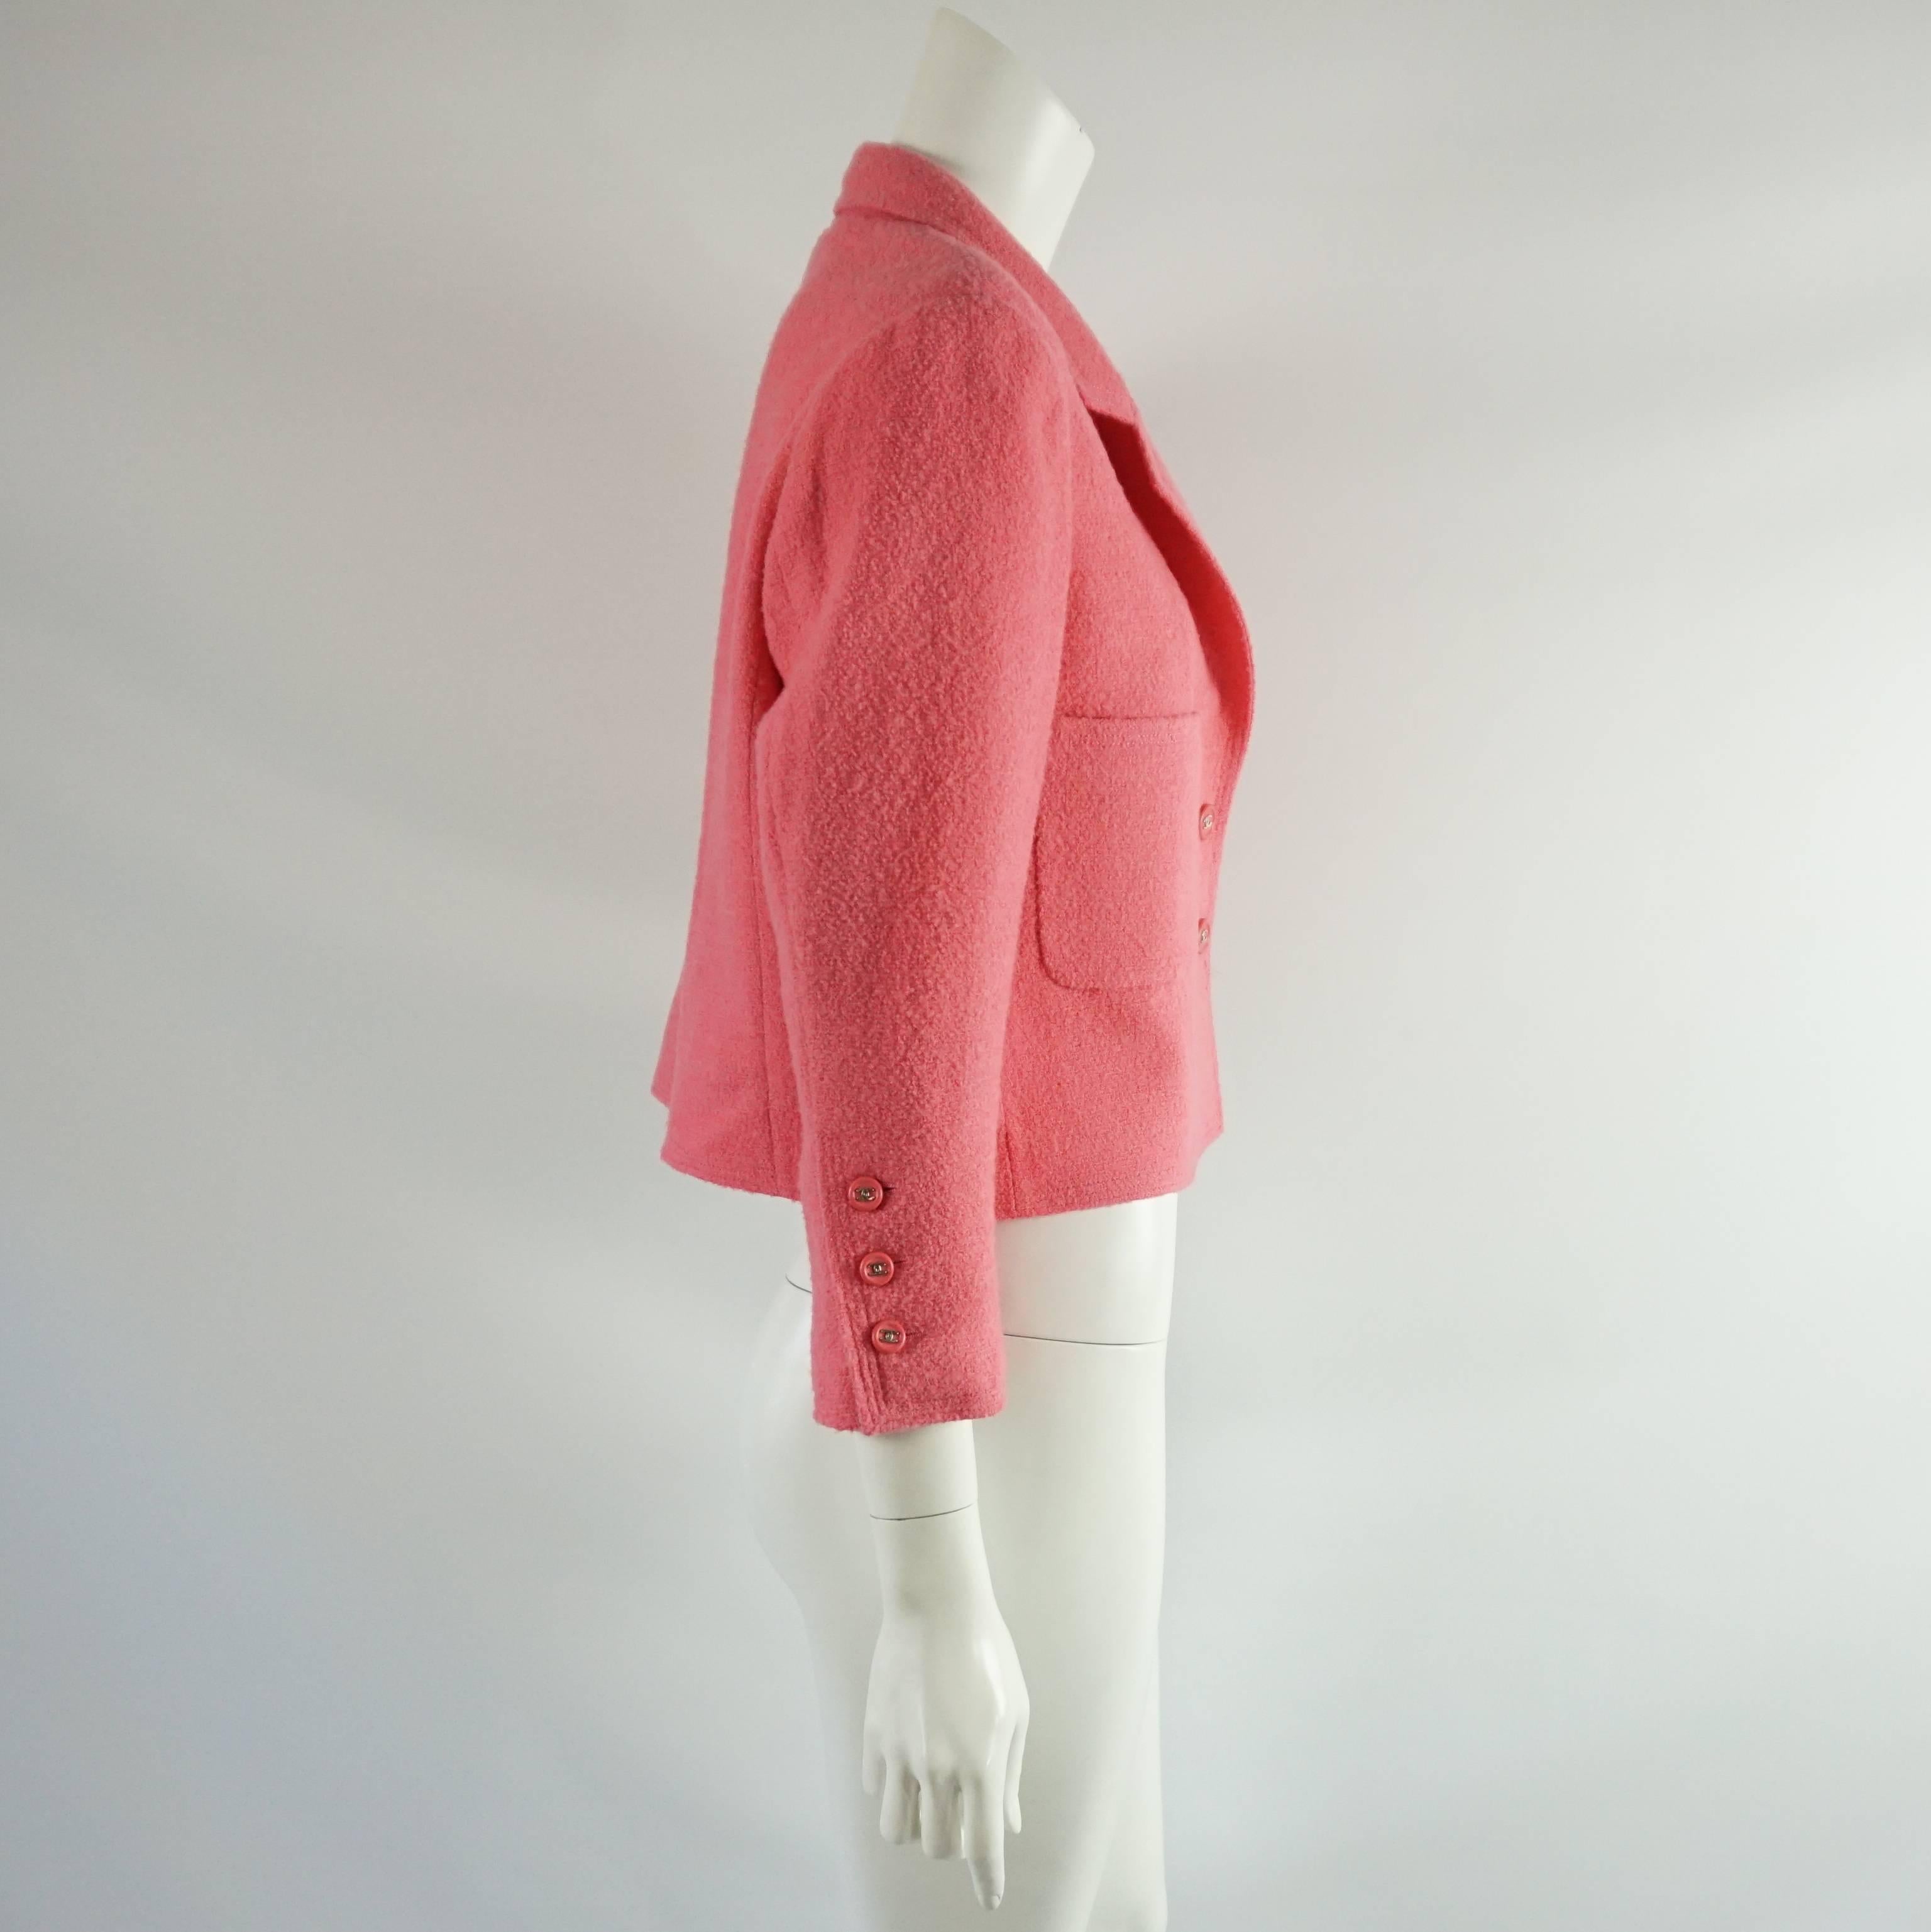 This beautiful Chanel cropped jacket is pink wool. There are 2 large pockets on the front. The buttons are pink with a silver Chanel logo and there are 2 buttons on the front and 3 on each sleeve. This jacket is in excellent condition. Size 8, circa